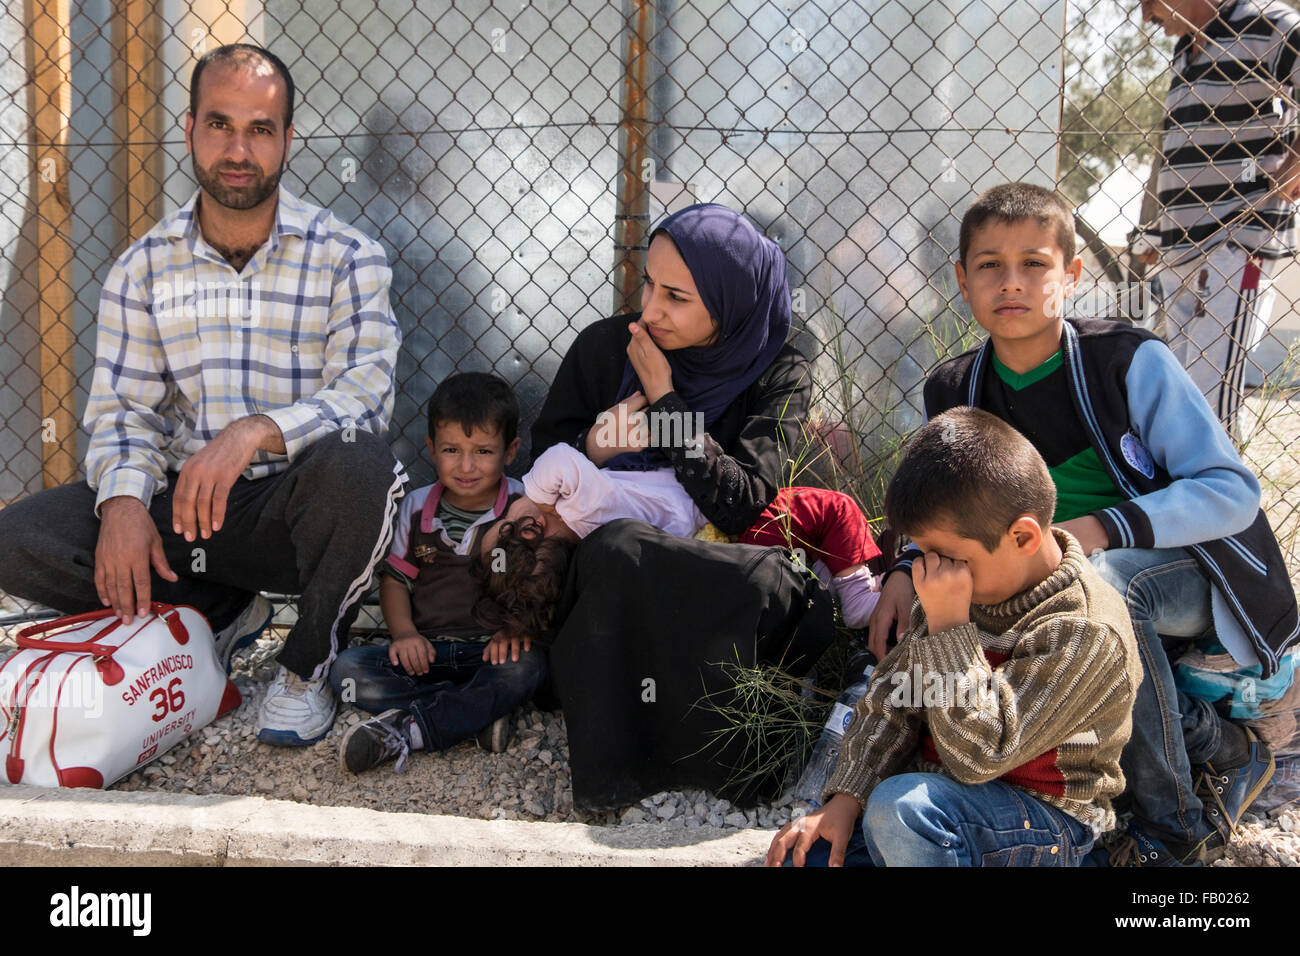 An Iraqi refugee family seeks refuge in the Kara Tepe transit camp in Mytillene, Lesvos, after crossing by raft from Turkey. Stock Photo